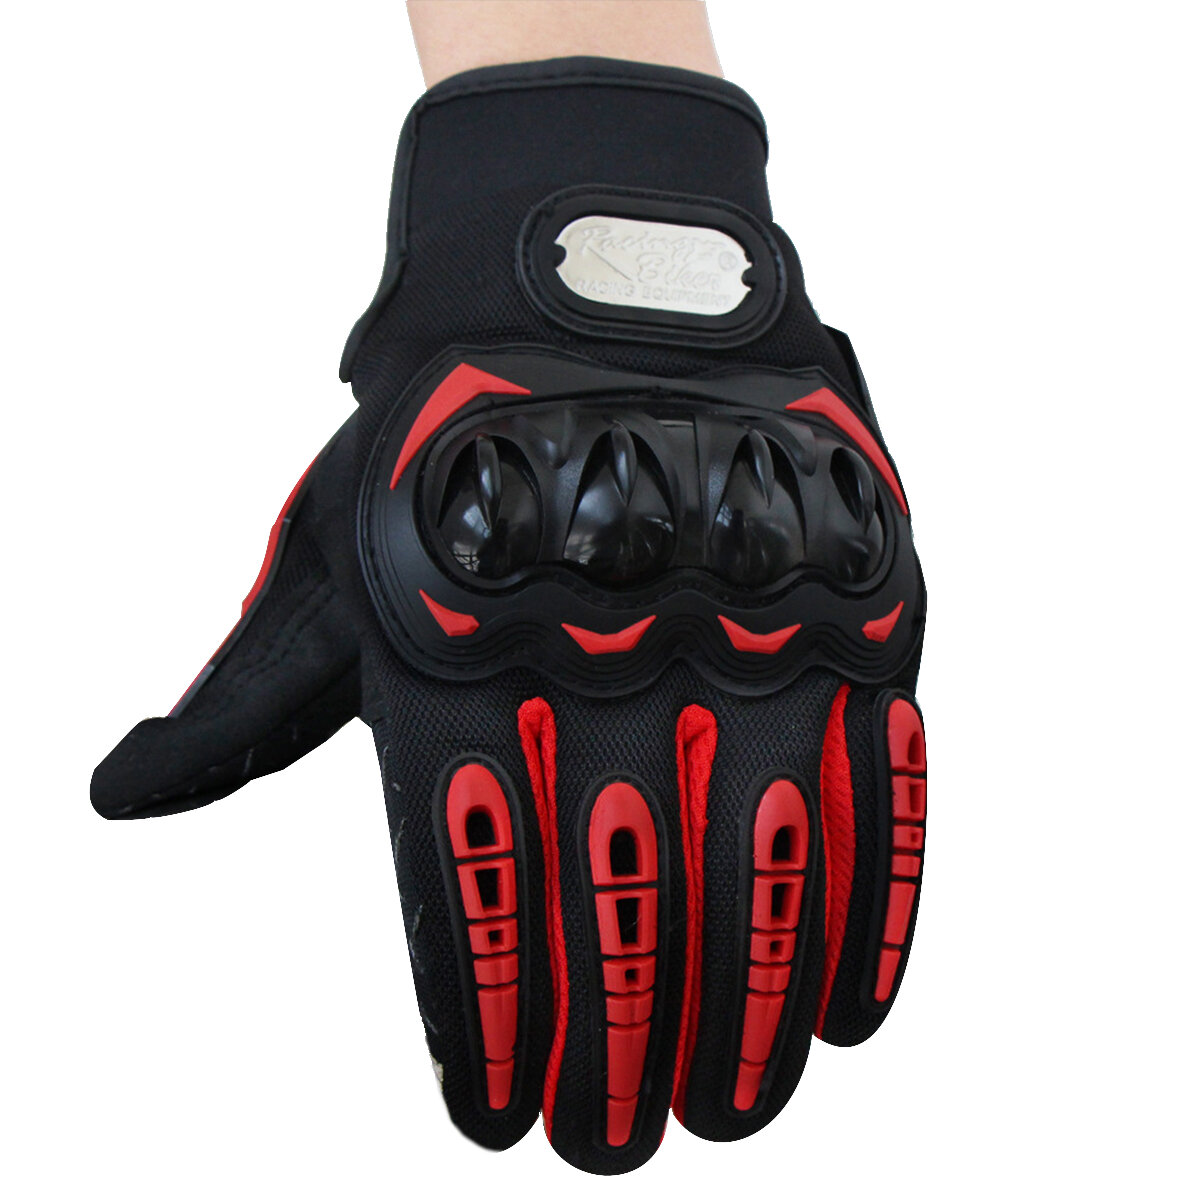 Touch Screen Full Finger Gloves Winter Motorcycle Warm Motocross Protective Gear Racing Mittens